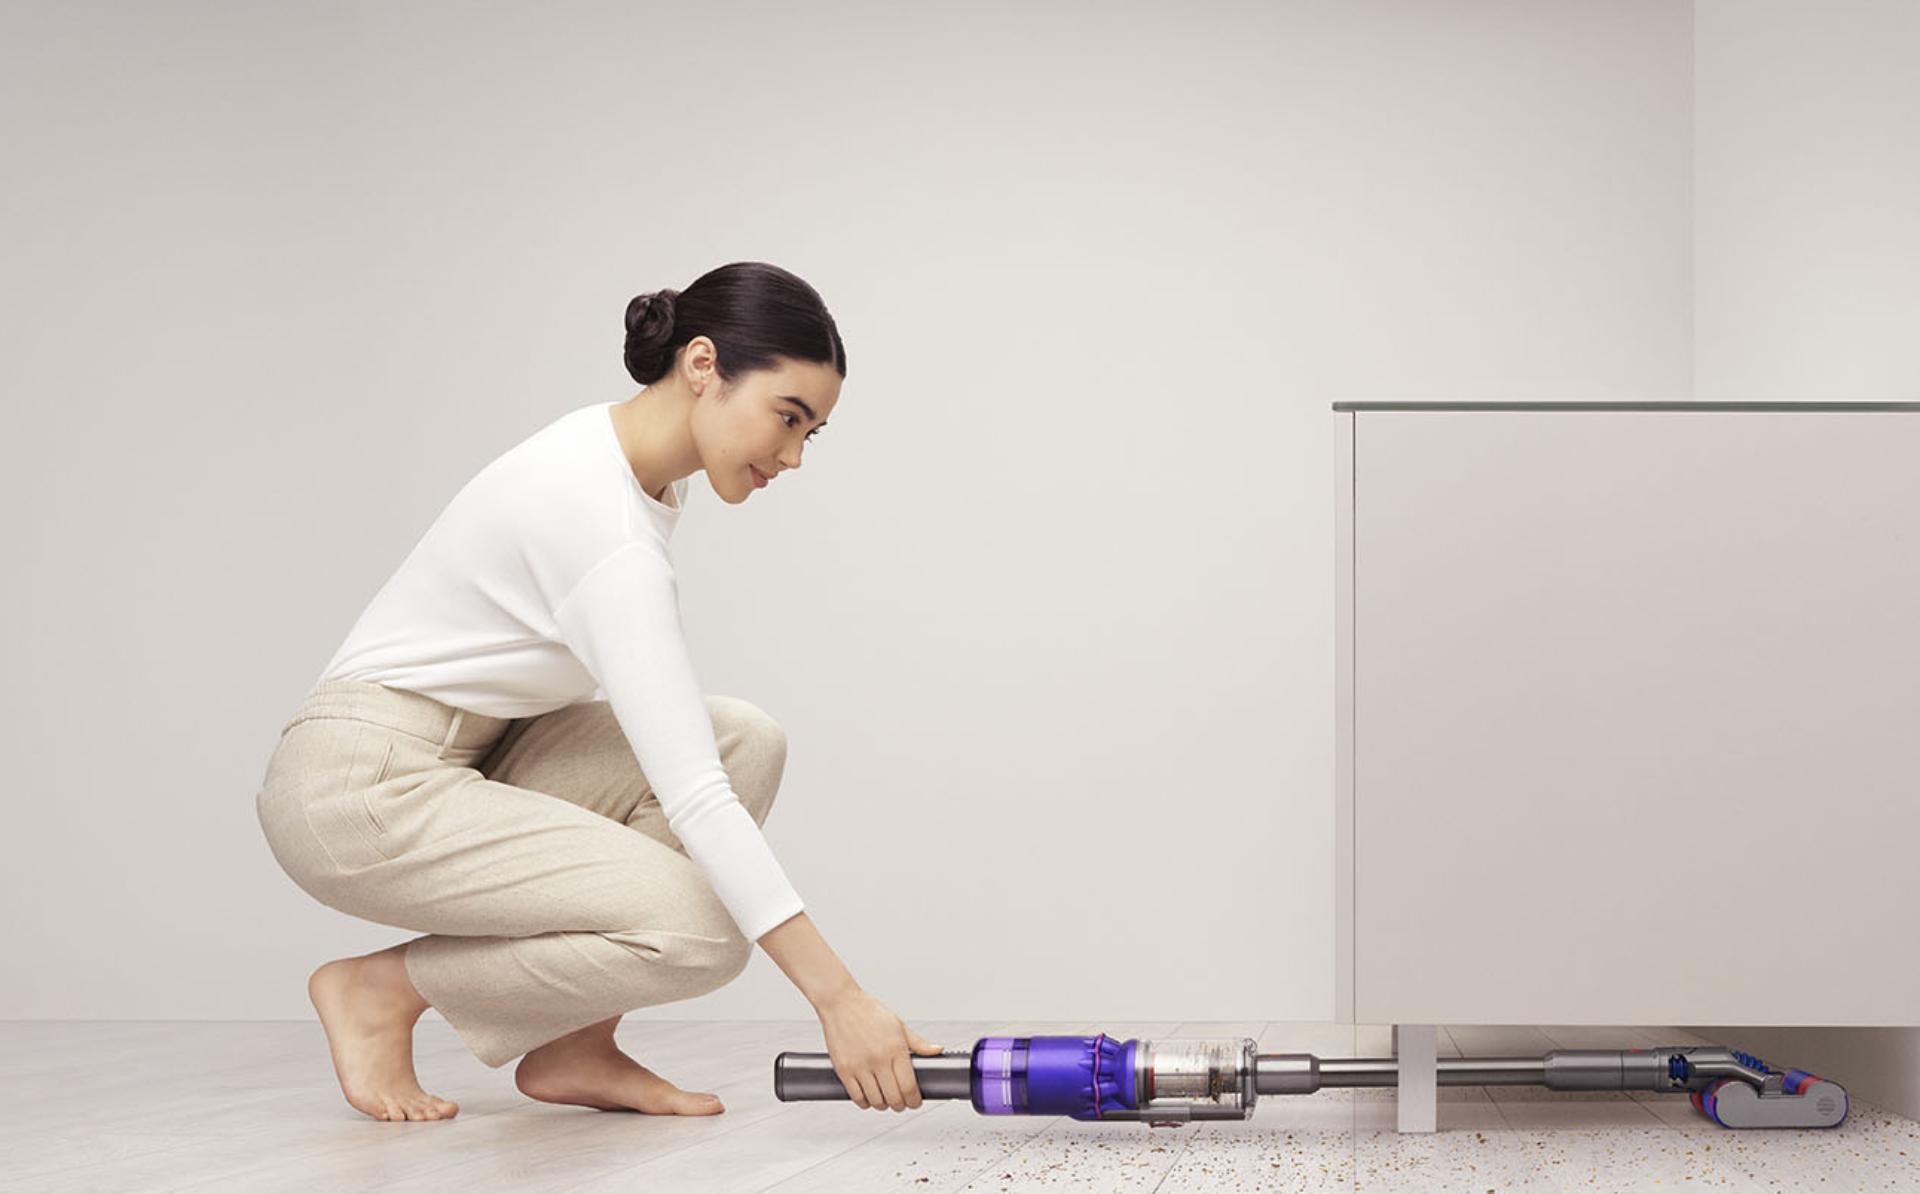 Dyson Omni-Glide vacuum vacuuming under a cabinet.